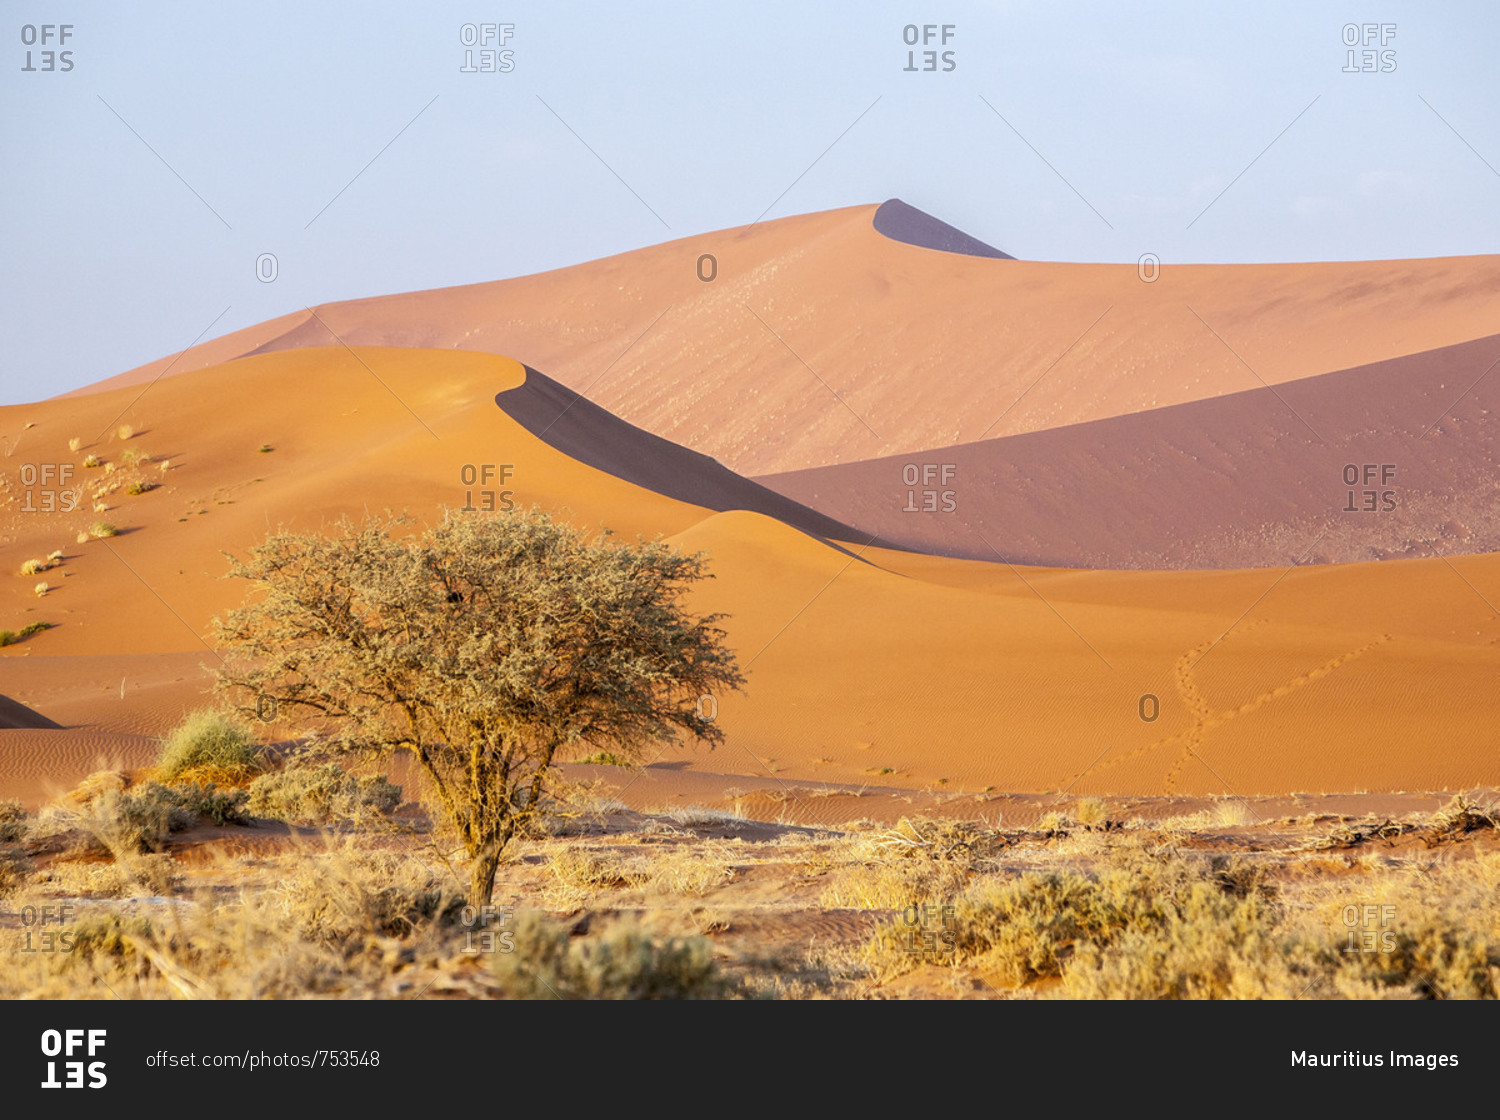 Bushes and dried plants among the dunes shaped by wind Deadvlei Sossusvlei Namib Desert Naukluft National Park Namibia Africa